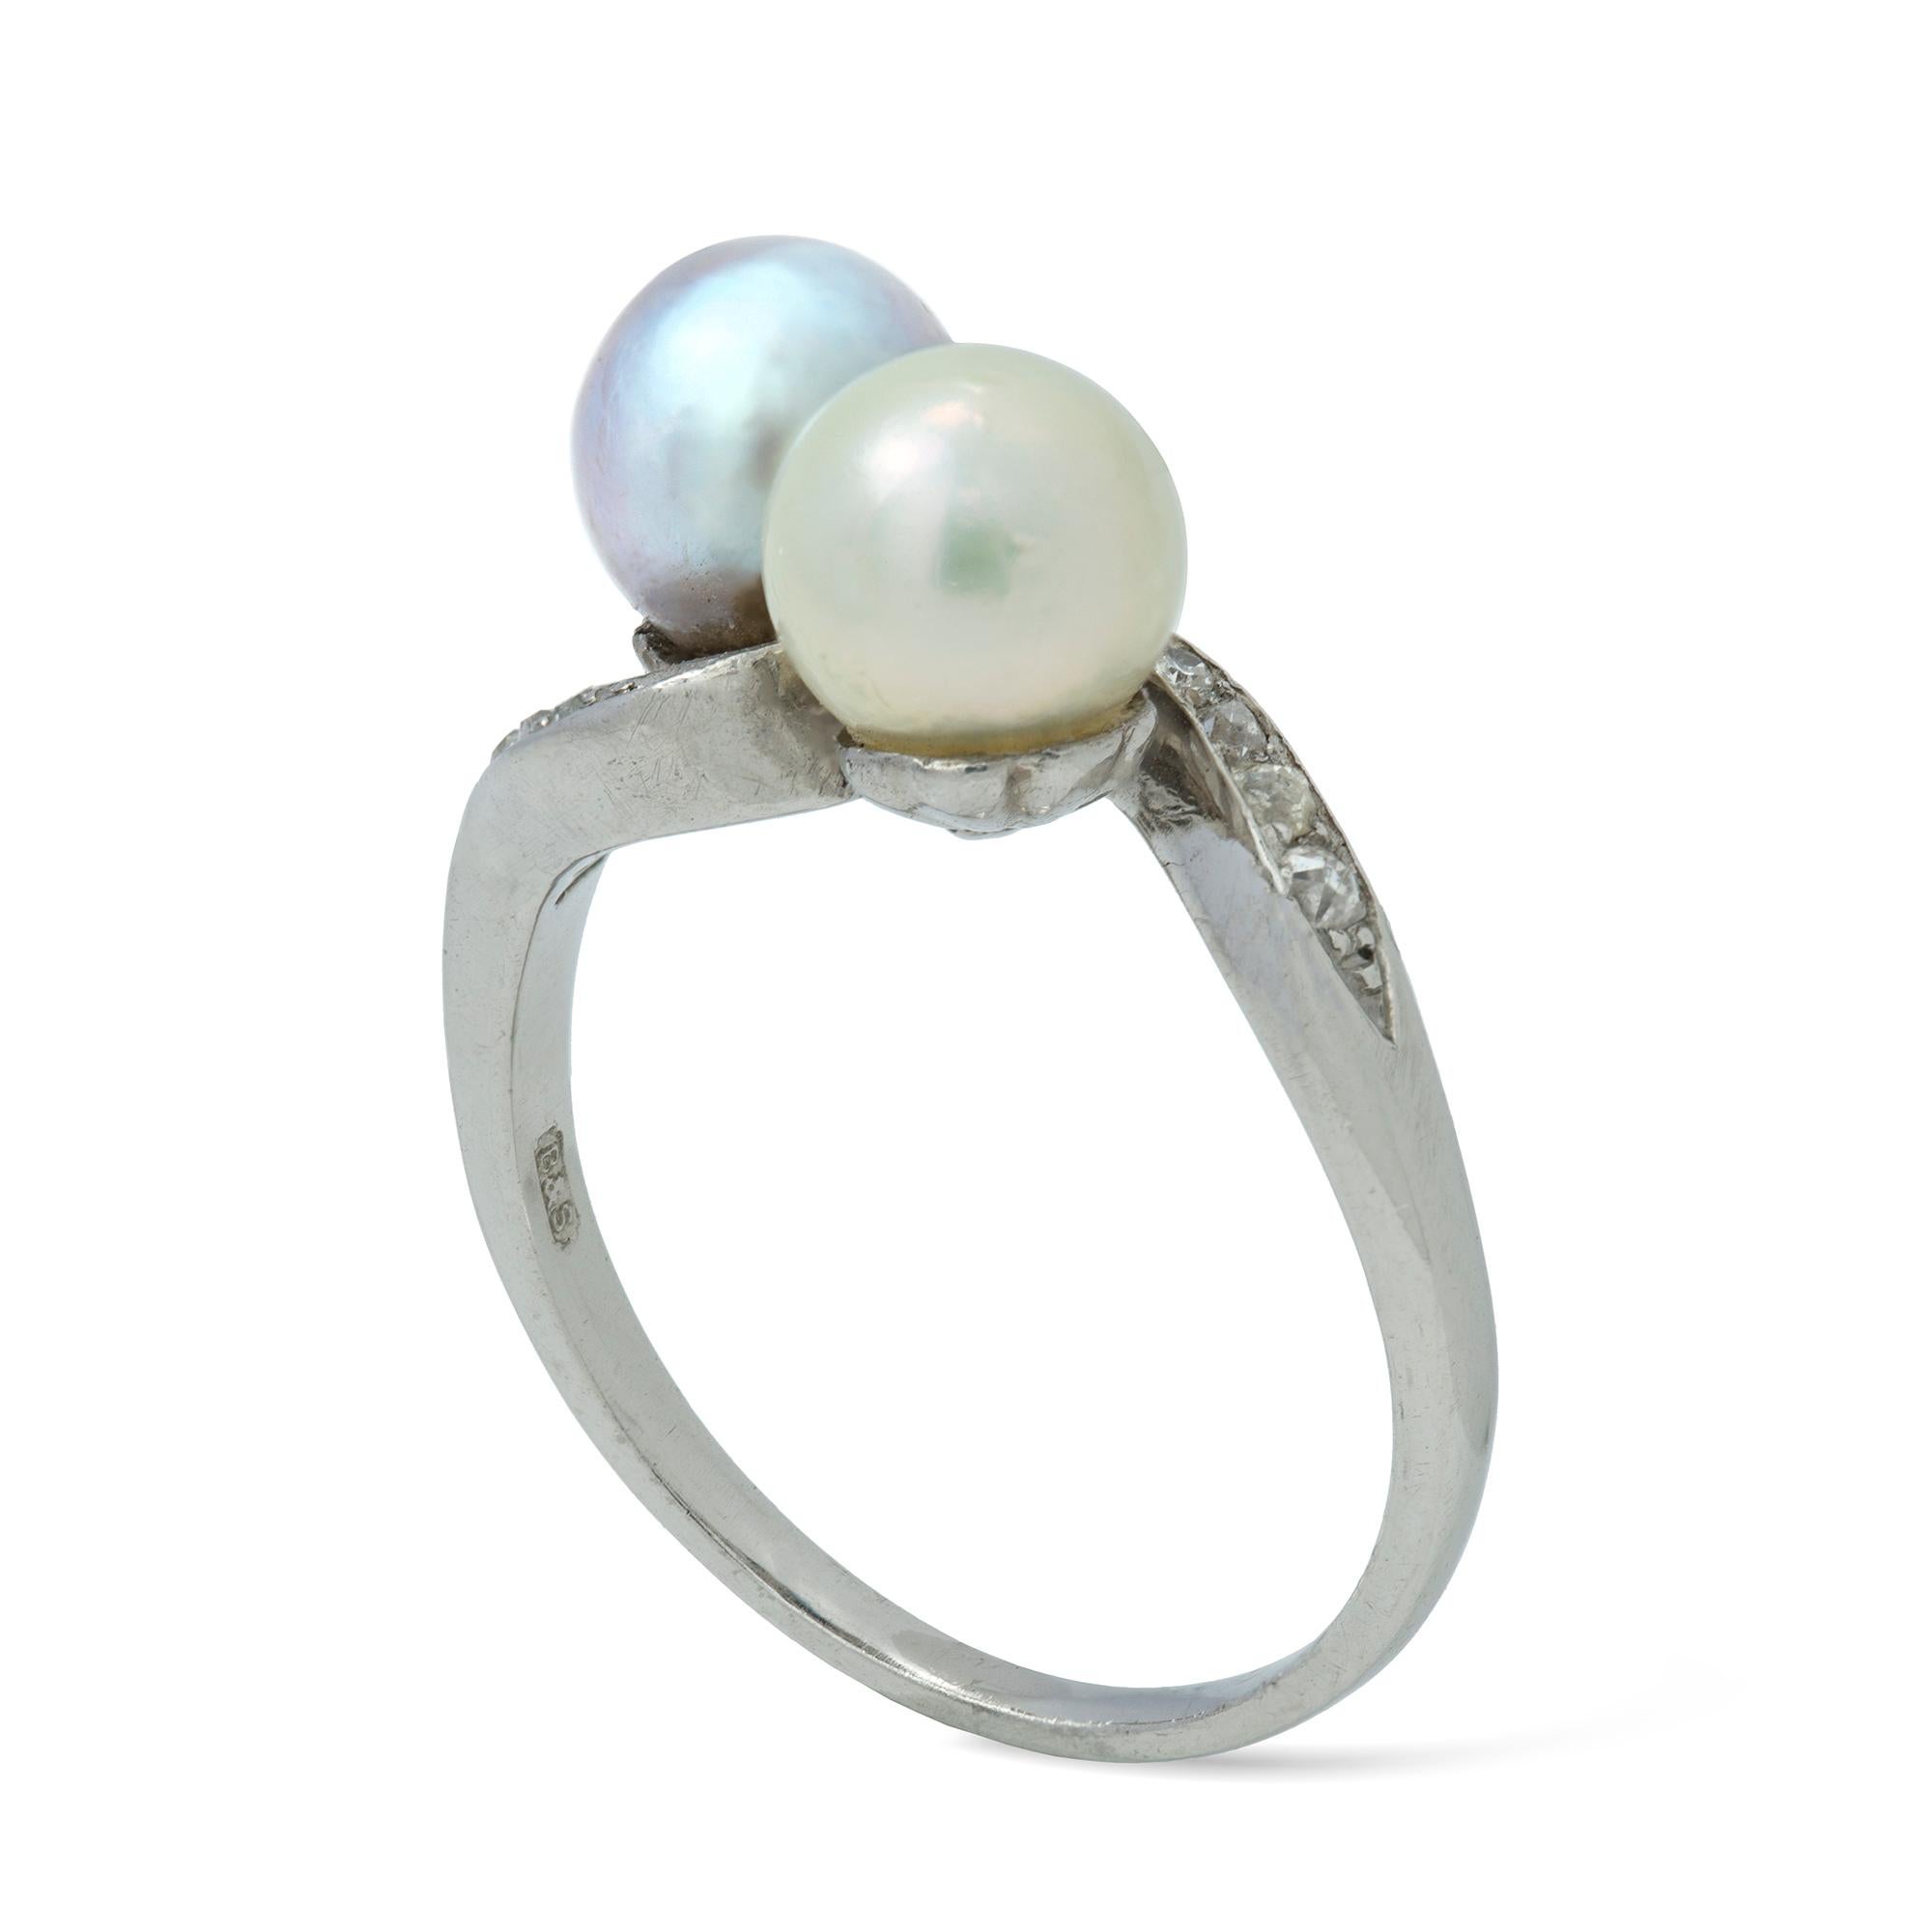 A cultured  pearls and diamonds cross-over ring, with one white and one purple cultured pearl diagonally set between curved diamond shoulders, with tapering D-Section shank all in platinum, later hallmarked London, 2012, bearing the Bentley&Skinner